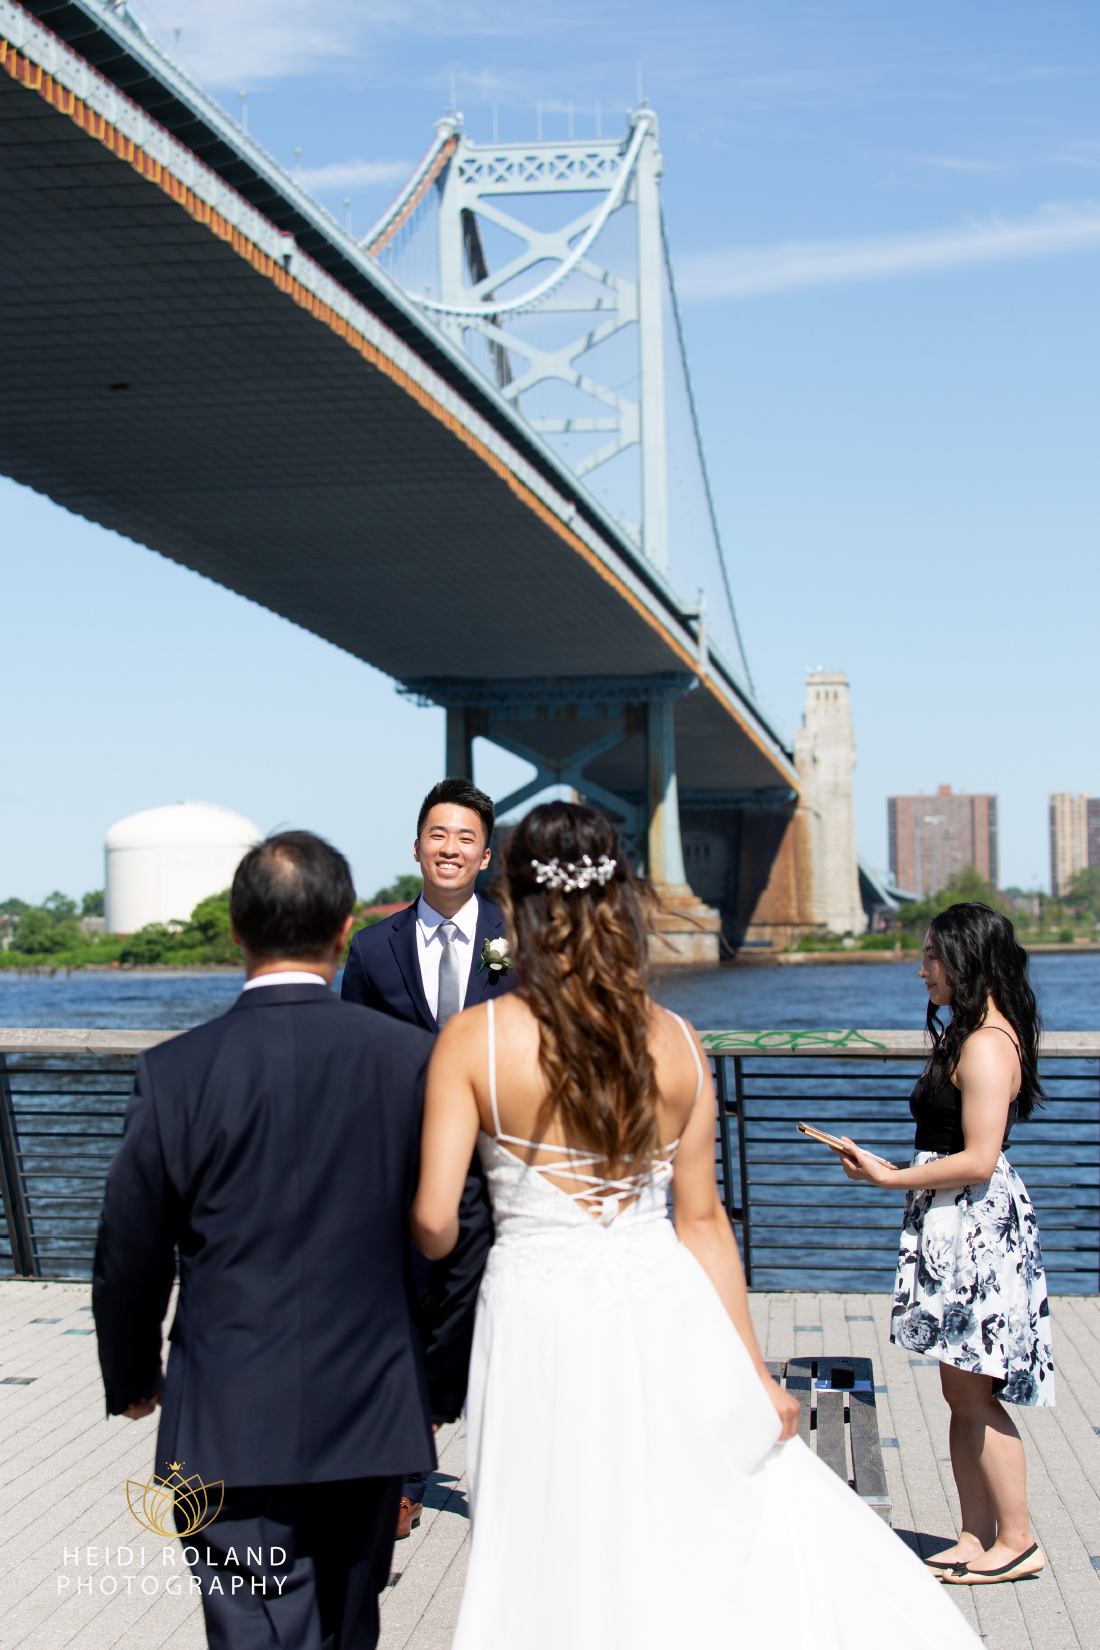 Groom smiling at bride and her father at Race Street Pier in Philly